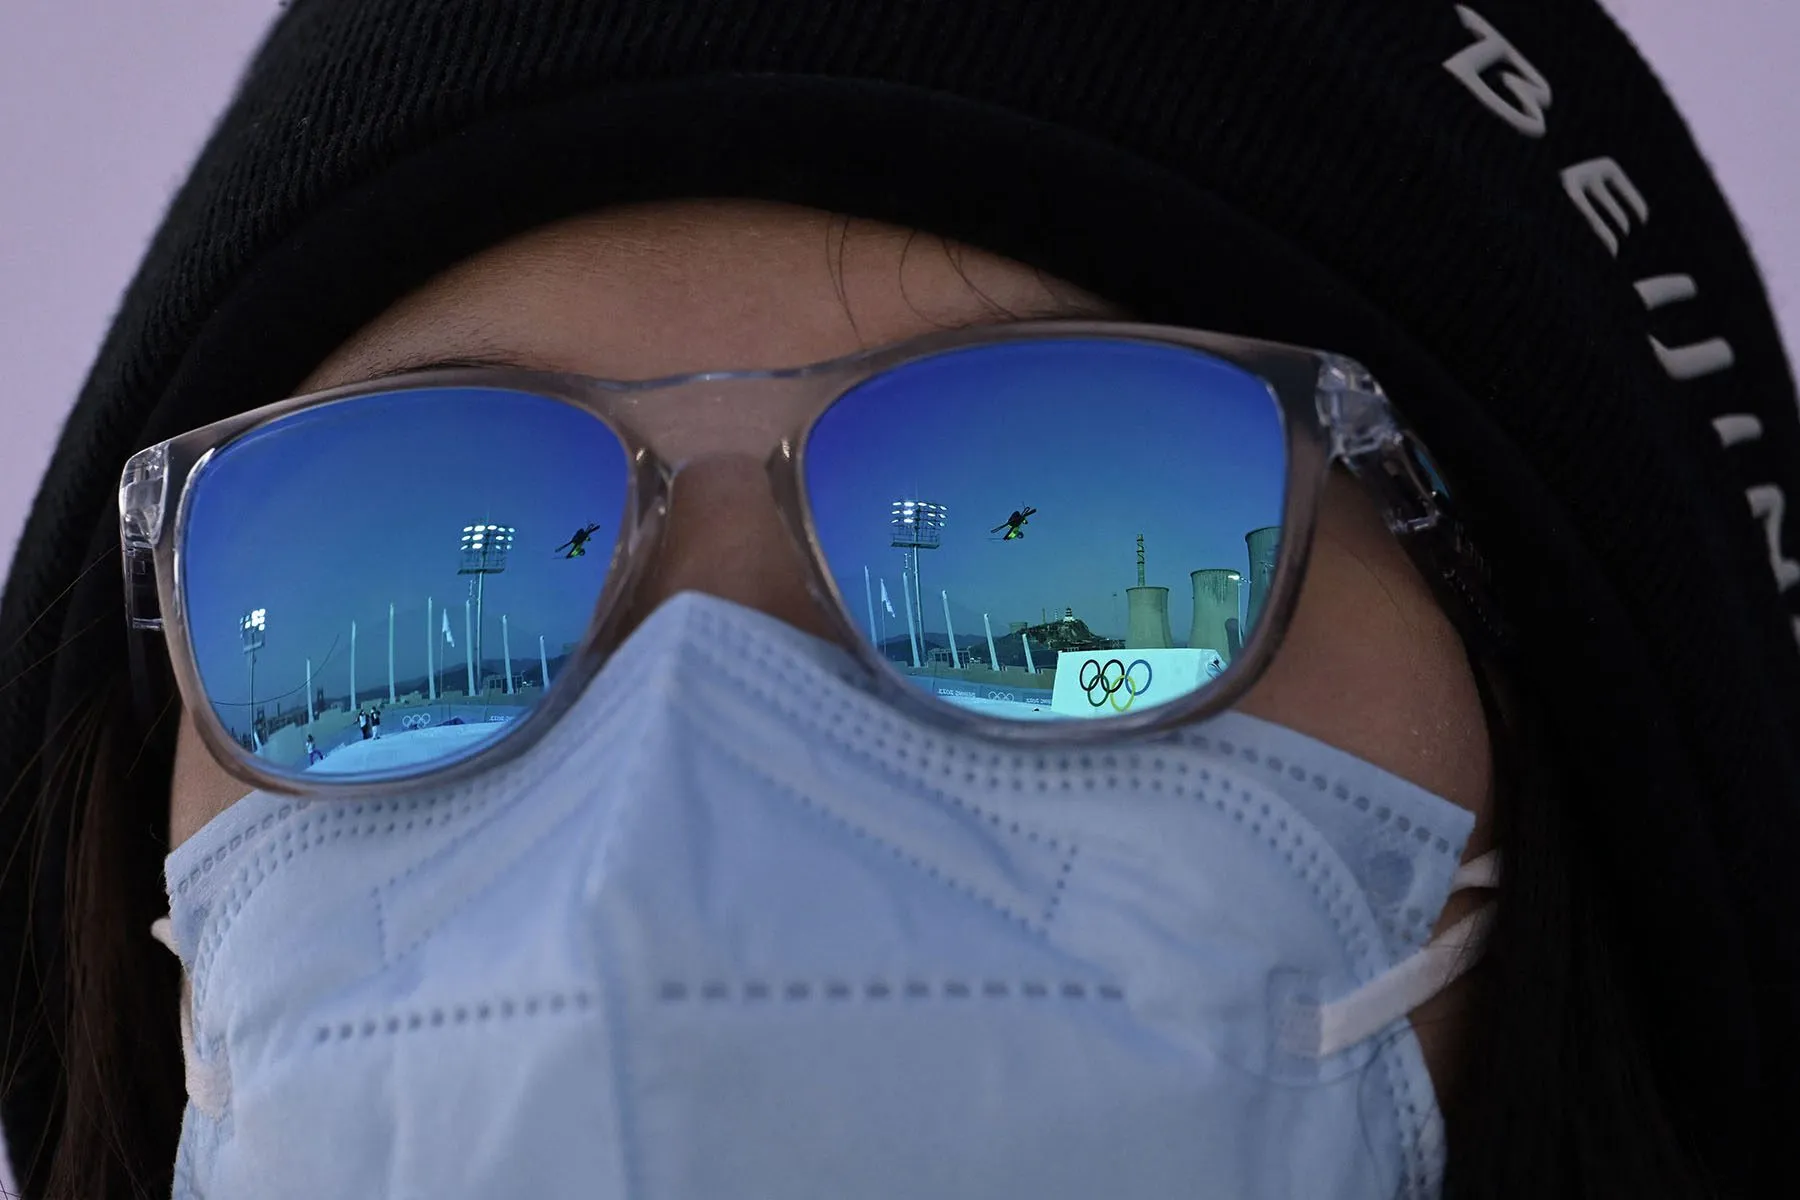 A skier is reflected in a volunteer's sunglasses as they watch the practice.